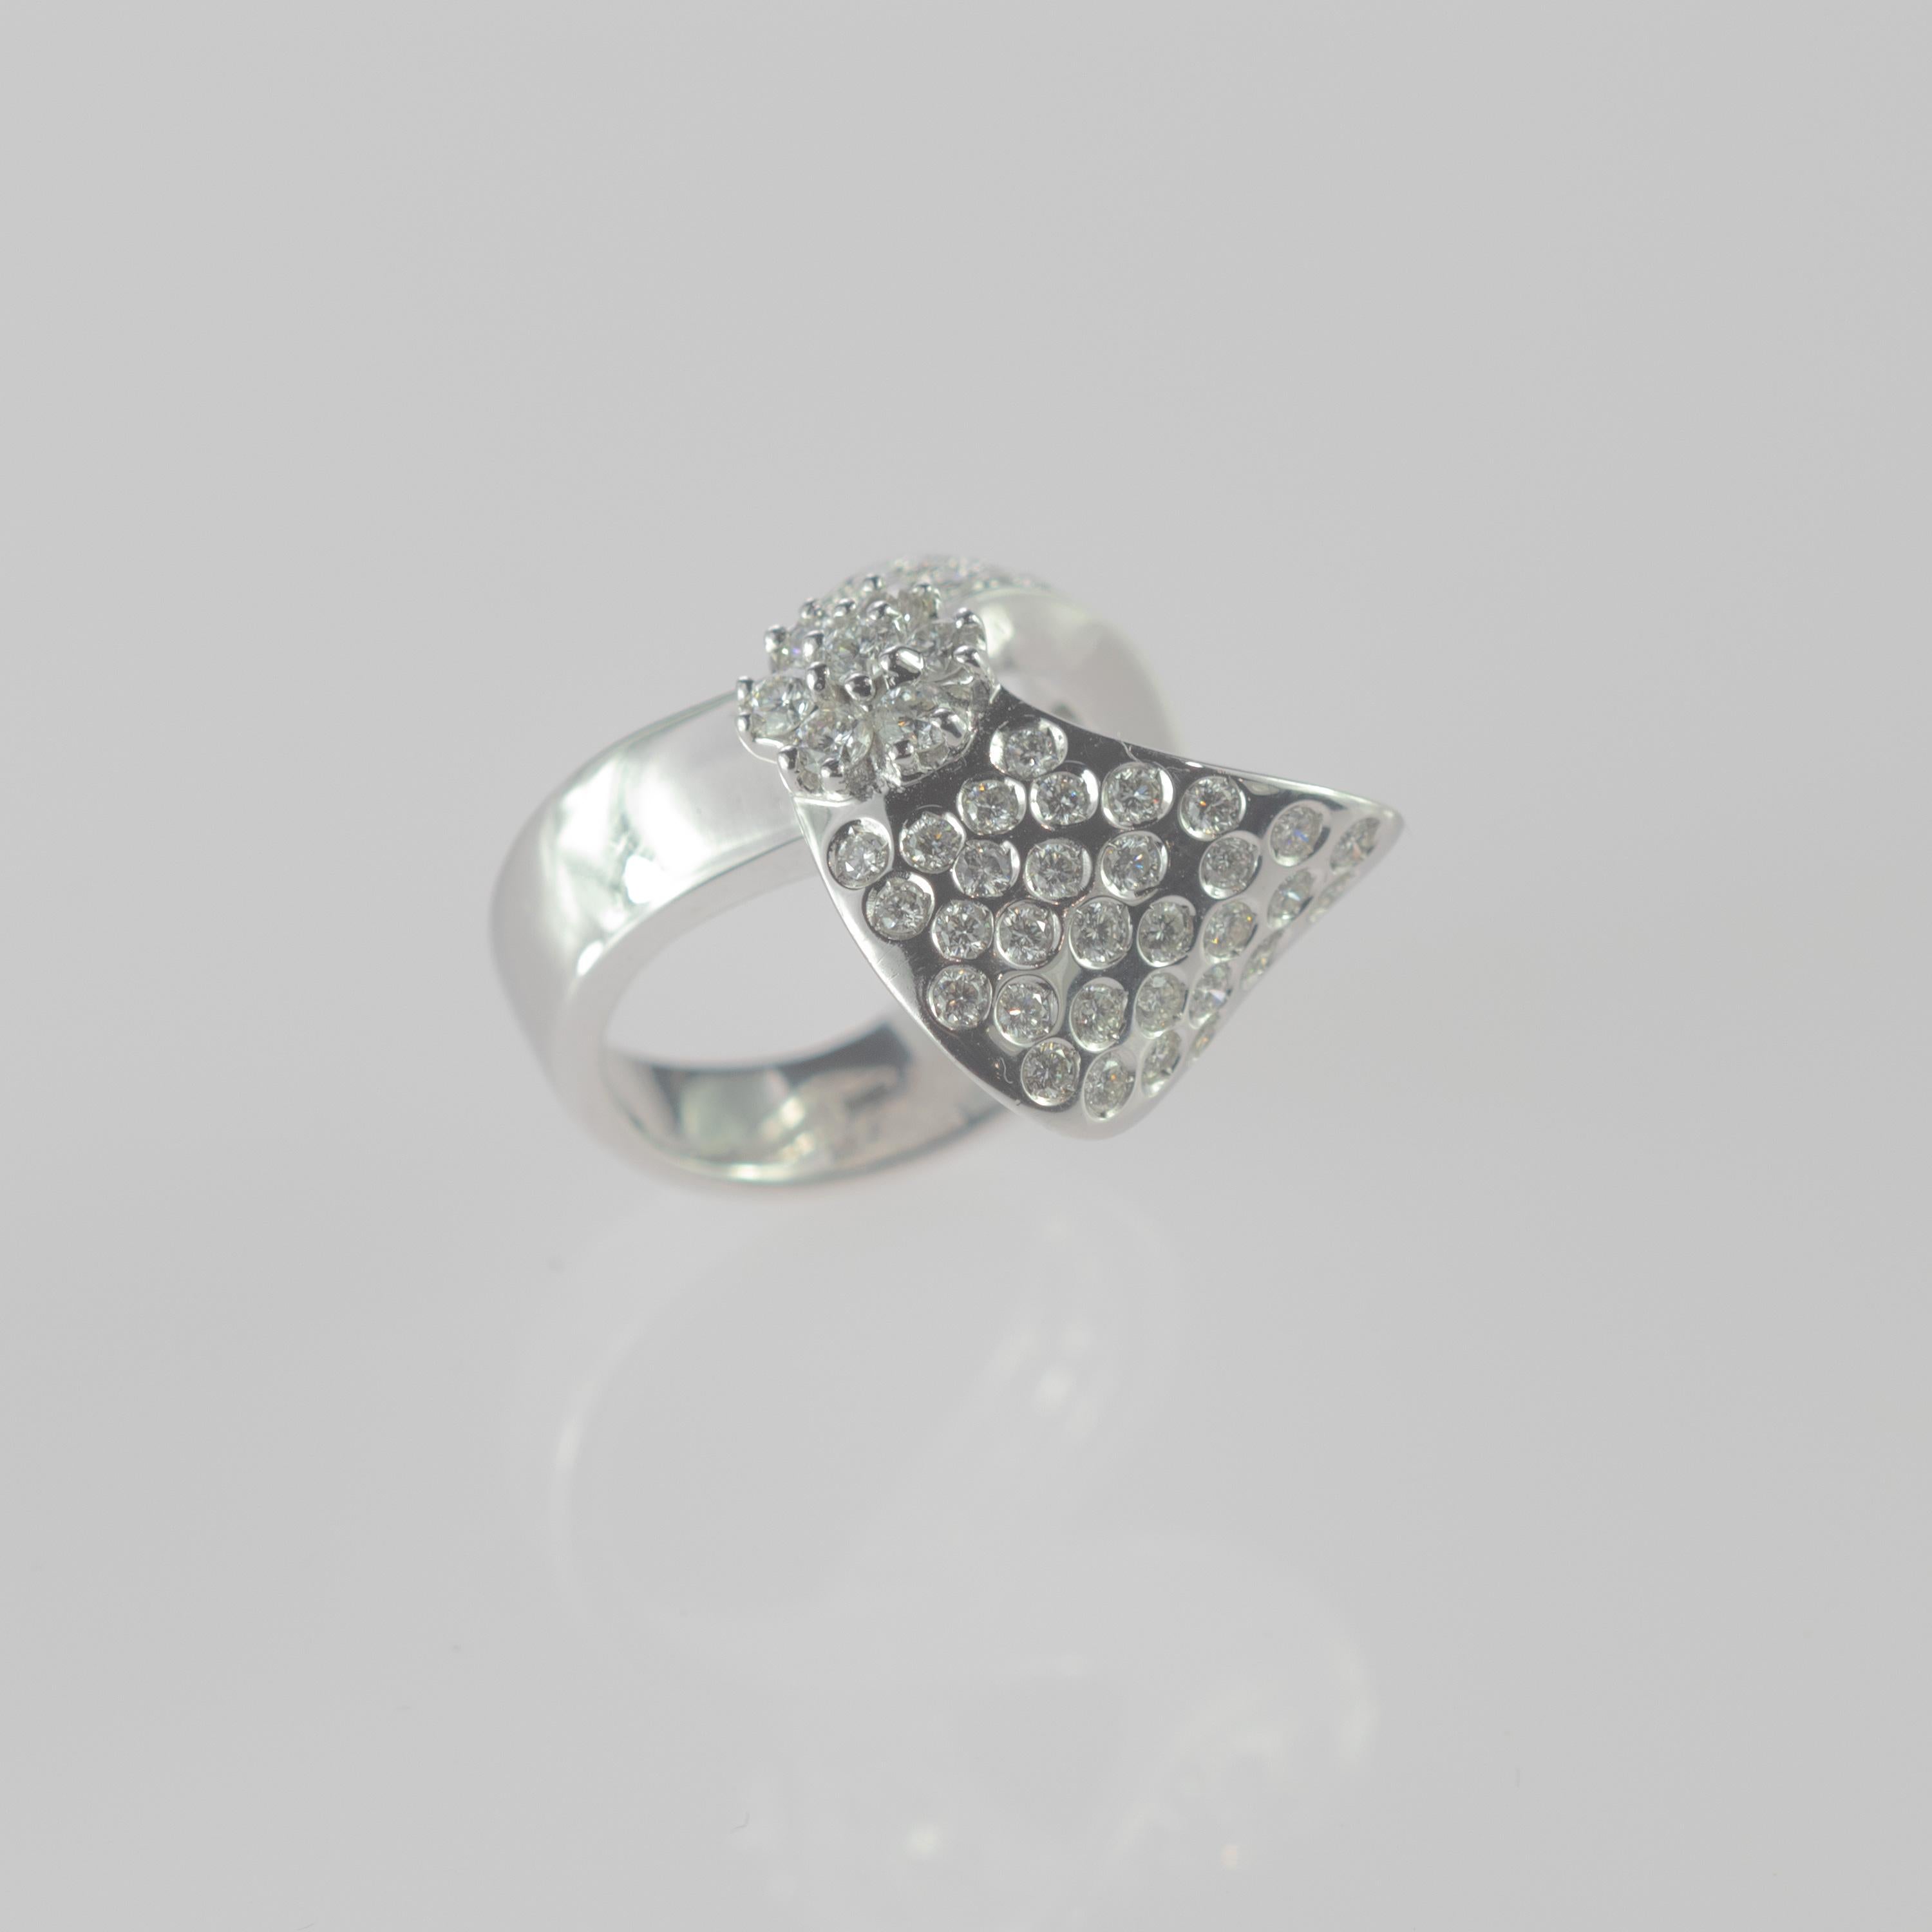 Mysterious and mystical italian design with 1.5 carat square brilliant cut diamond shape setted in smooth 18 carat white gold curves. This design involves the soft movement of the materials creating an unequal curved piece of jewelry beautifully